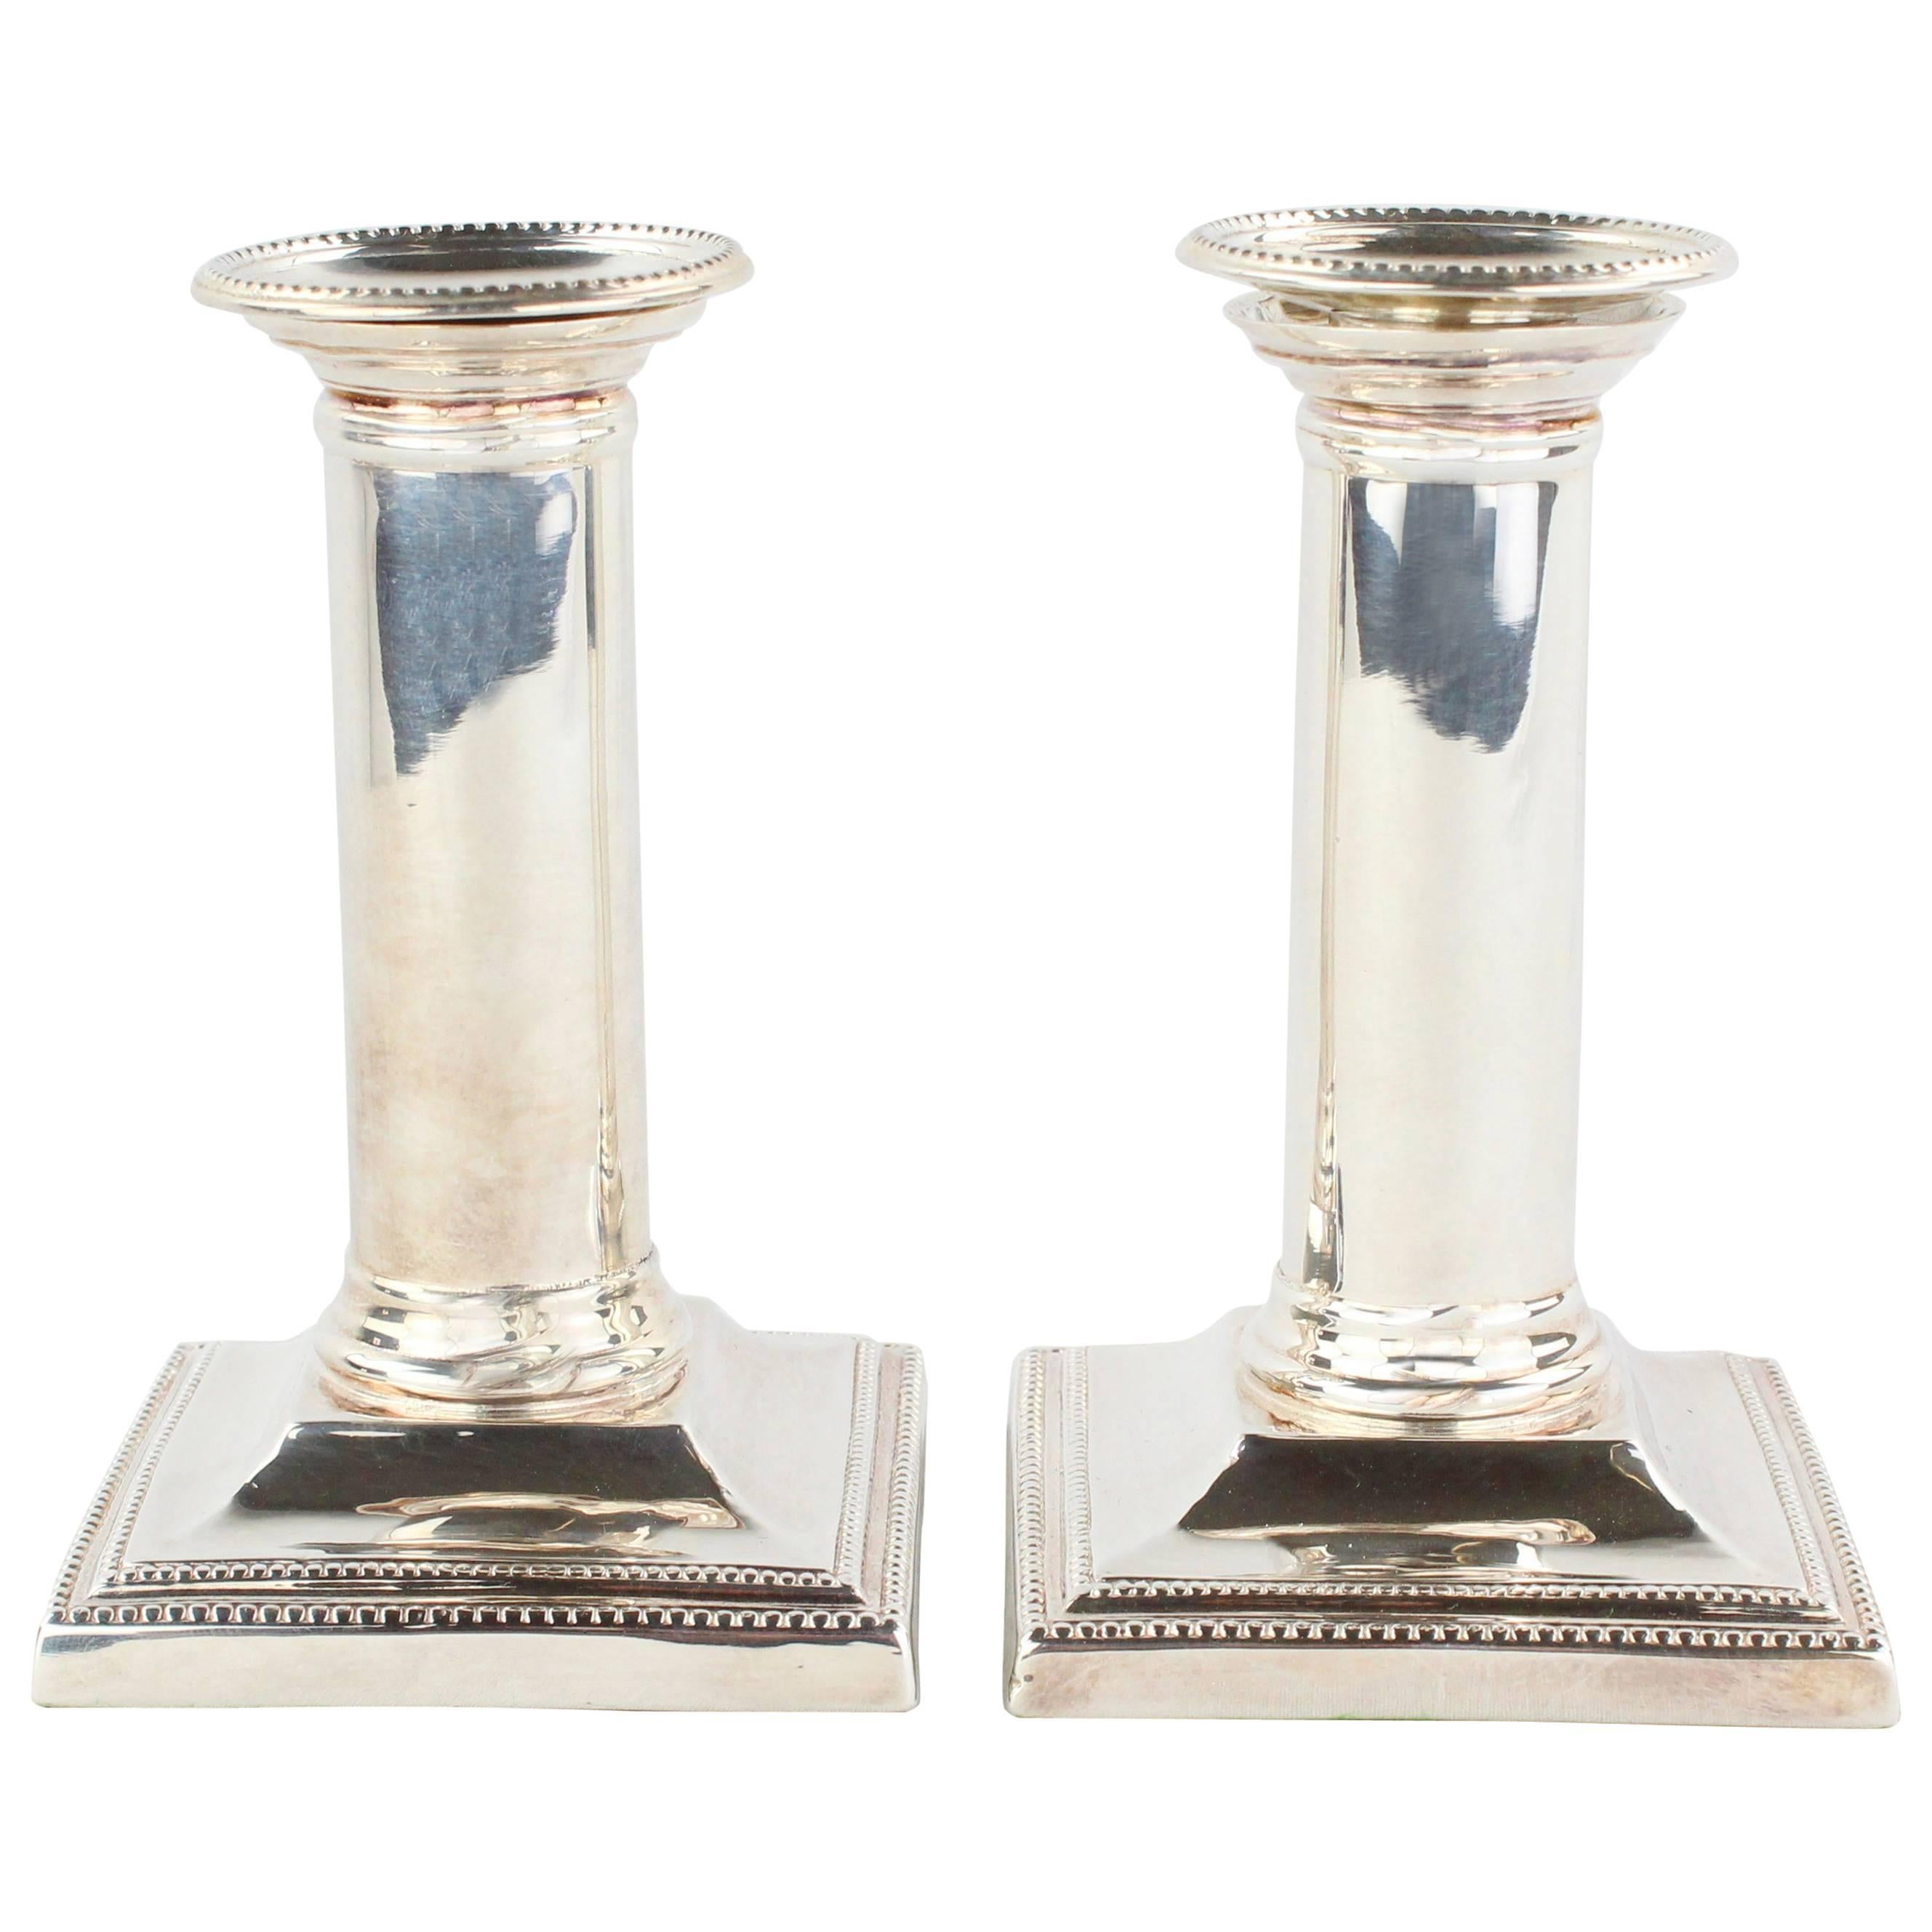 Hallmarked Pair of Candlesticks, 925 Sterling Silver, London, 1900